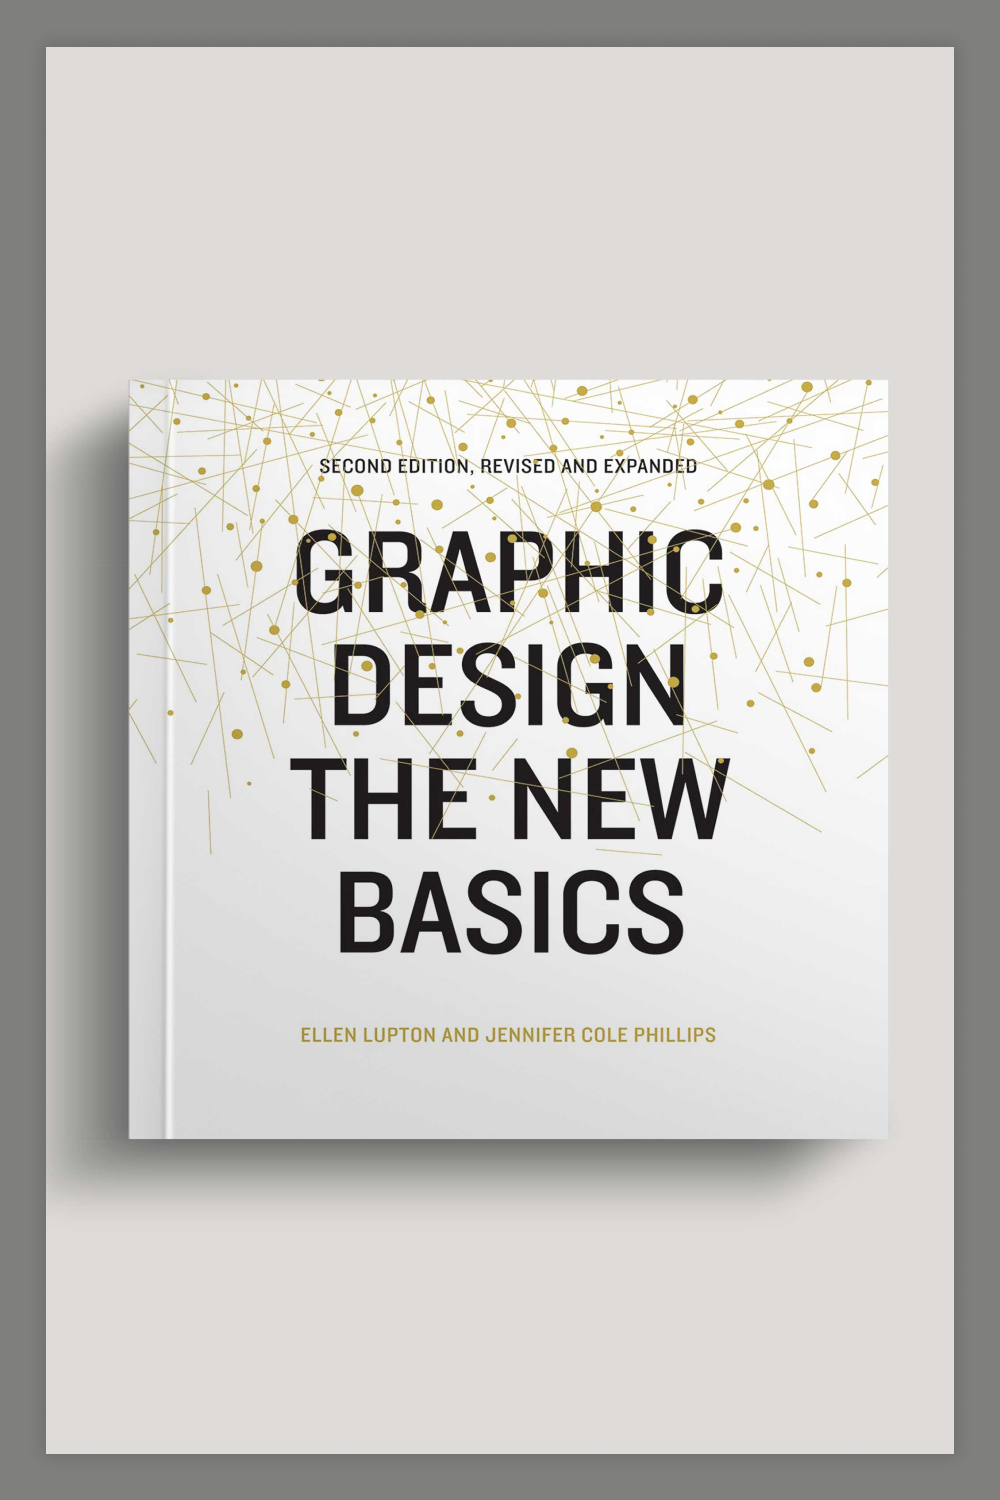 The book Graphic Design: The New Basics.